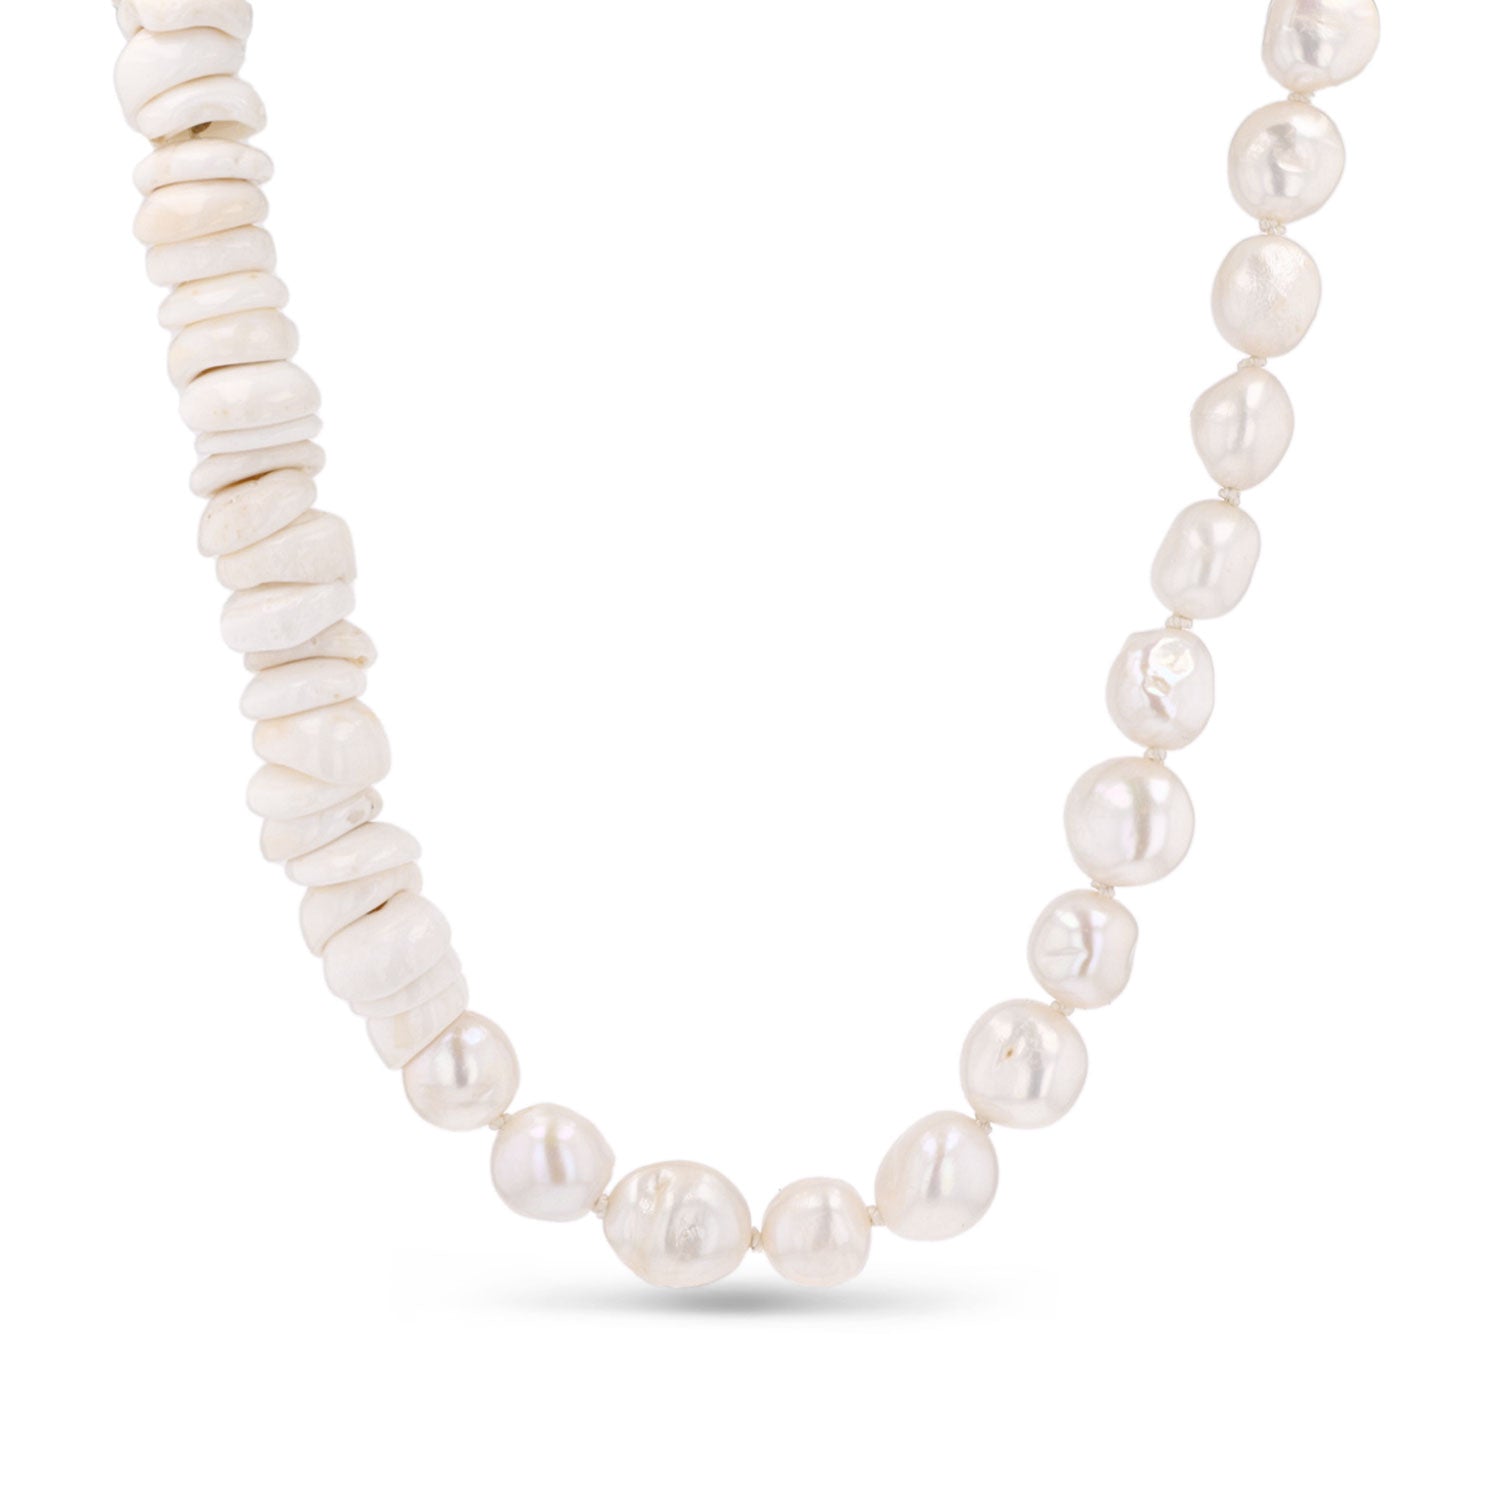 14K White Pearl and Puka Shell Knotted Necklace  NG002829 - TBird